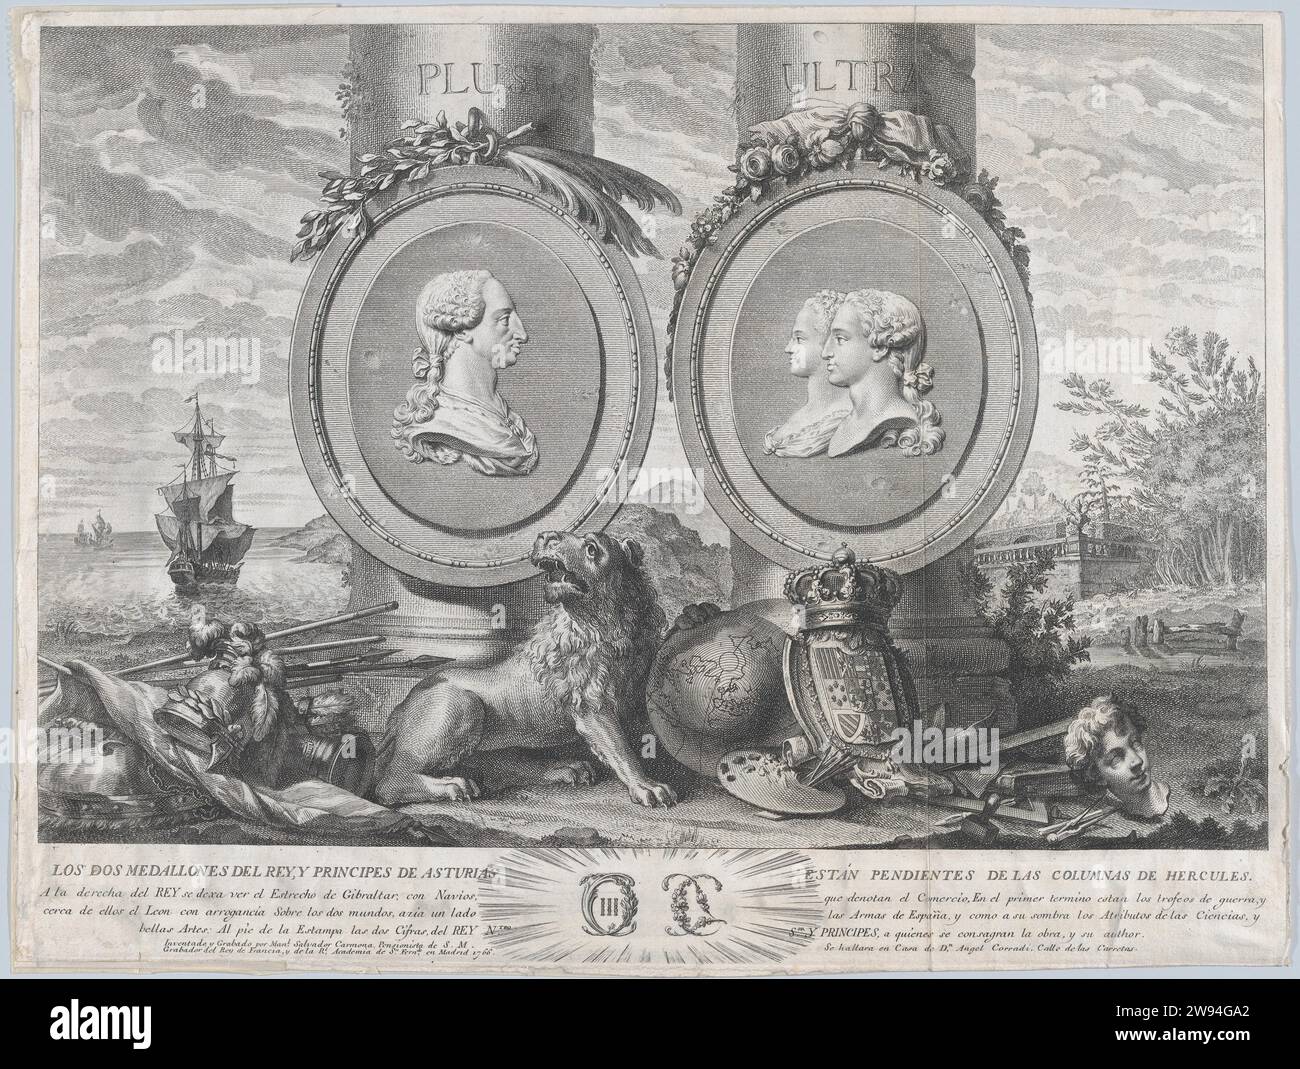 Two bust portraits of Carlos III at left and Carlos IV and Maria Louisa at right in roundels fixed to the columns of Hercules set within a landscape 1967 by Manuel Salvador Carmona Stock Photo